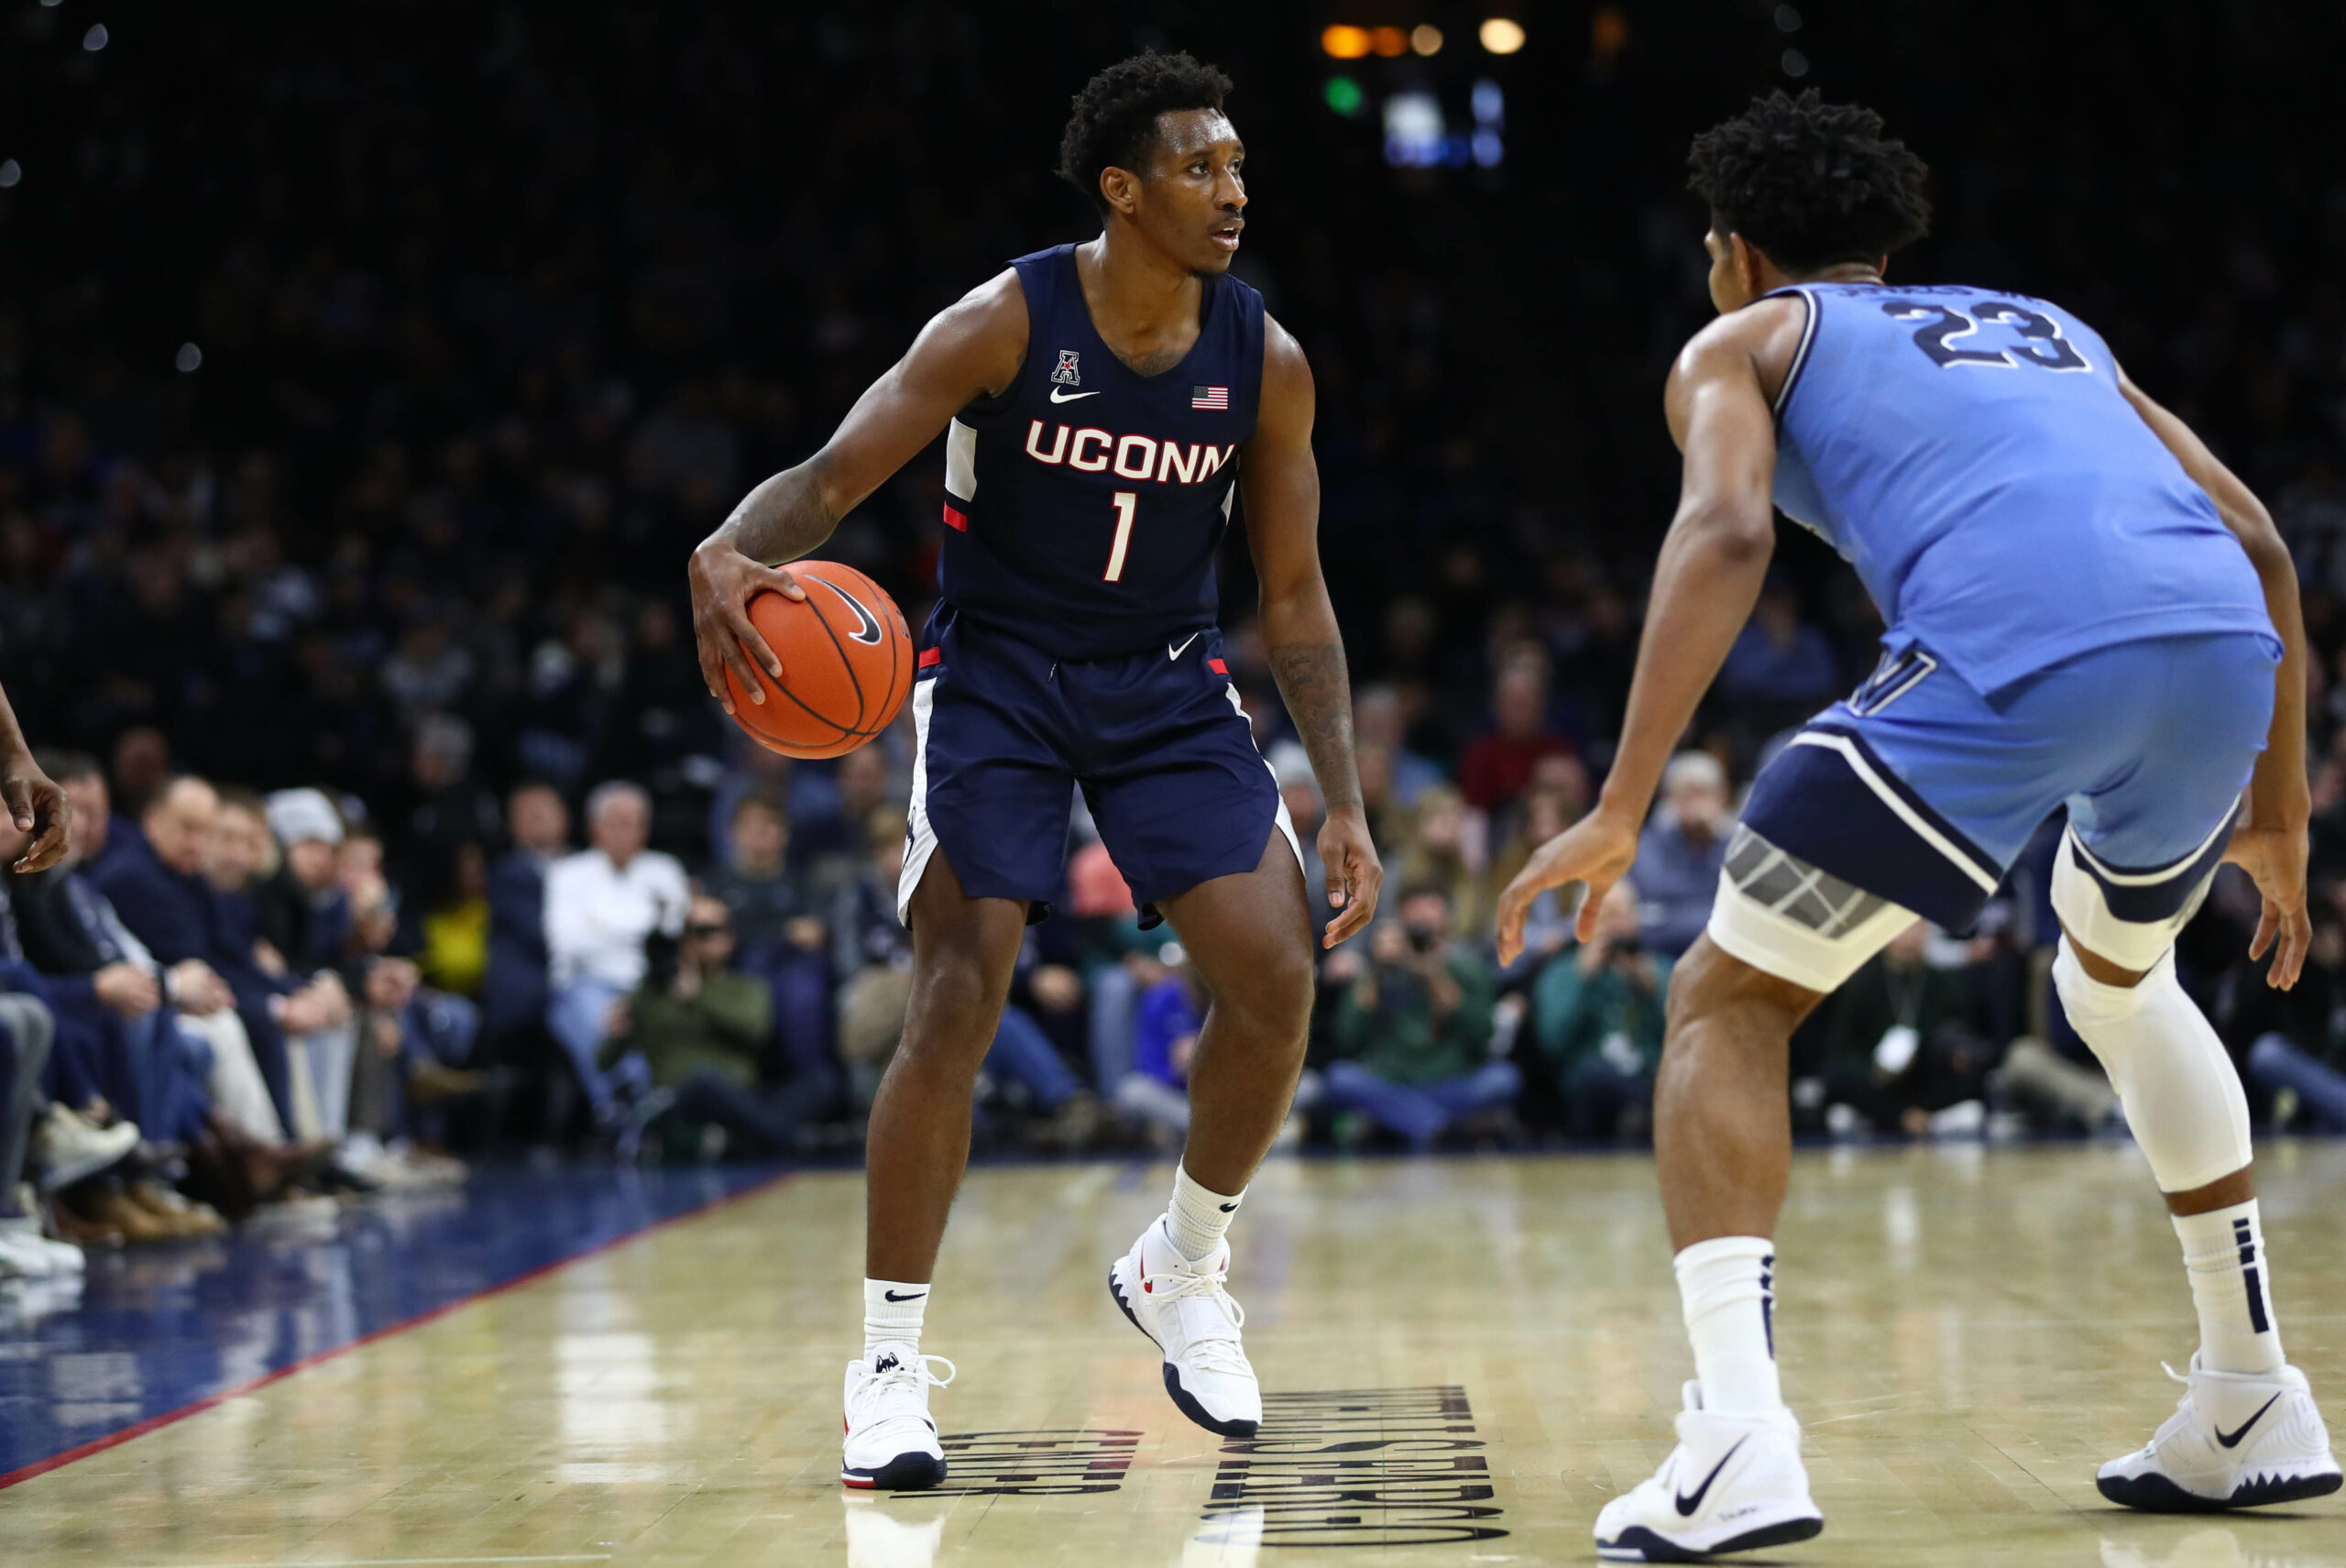 How to watch Villanova vs. UConn, live stream, TV channel, time, NCAA college basketball